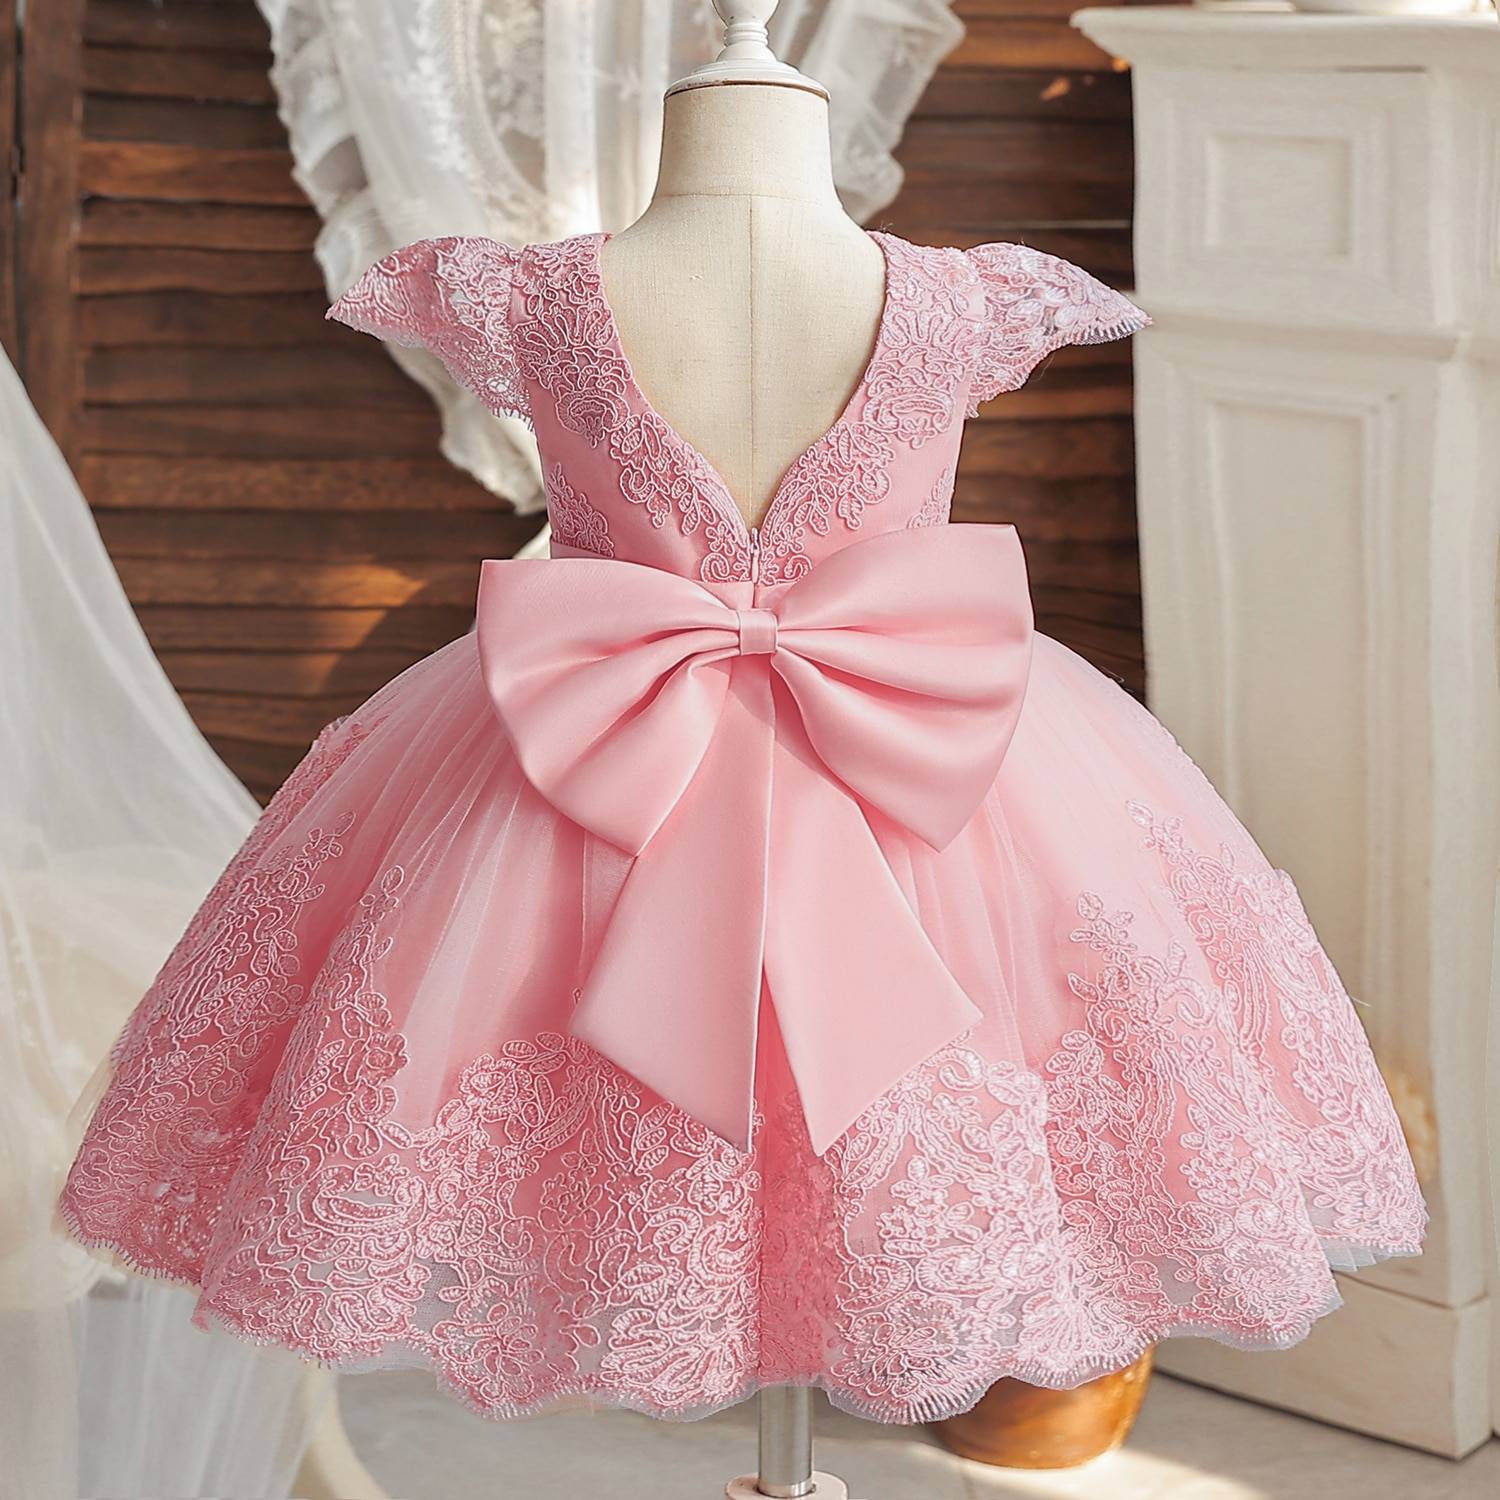 Girls Lace Party Dress